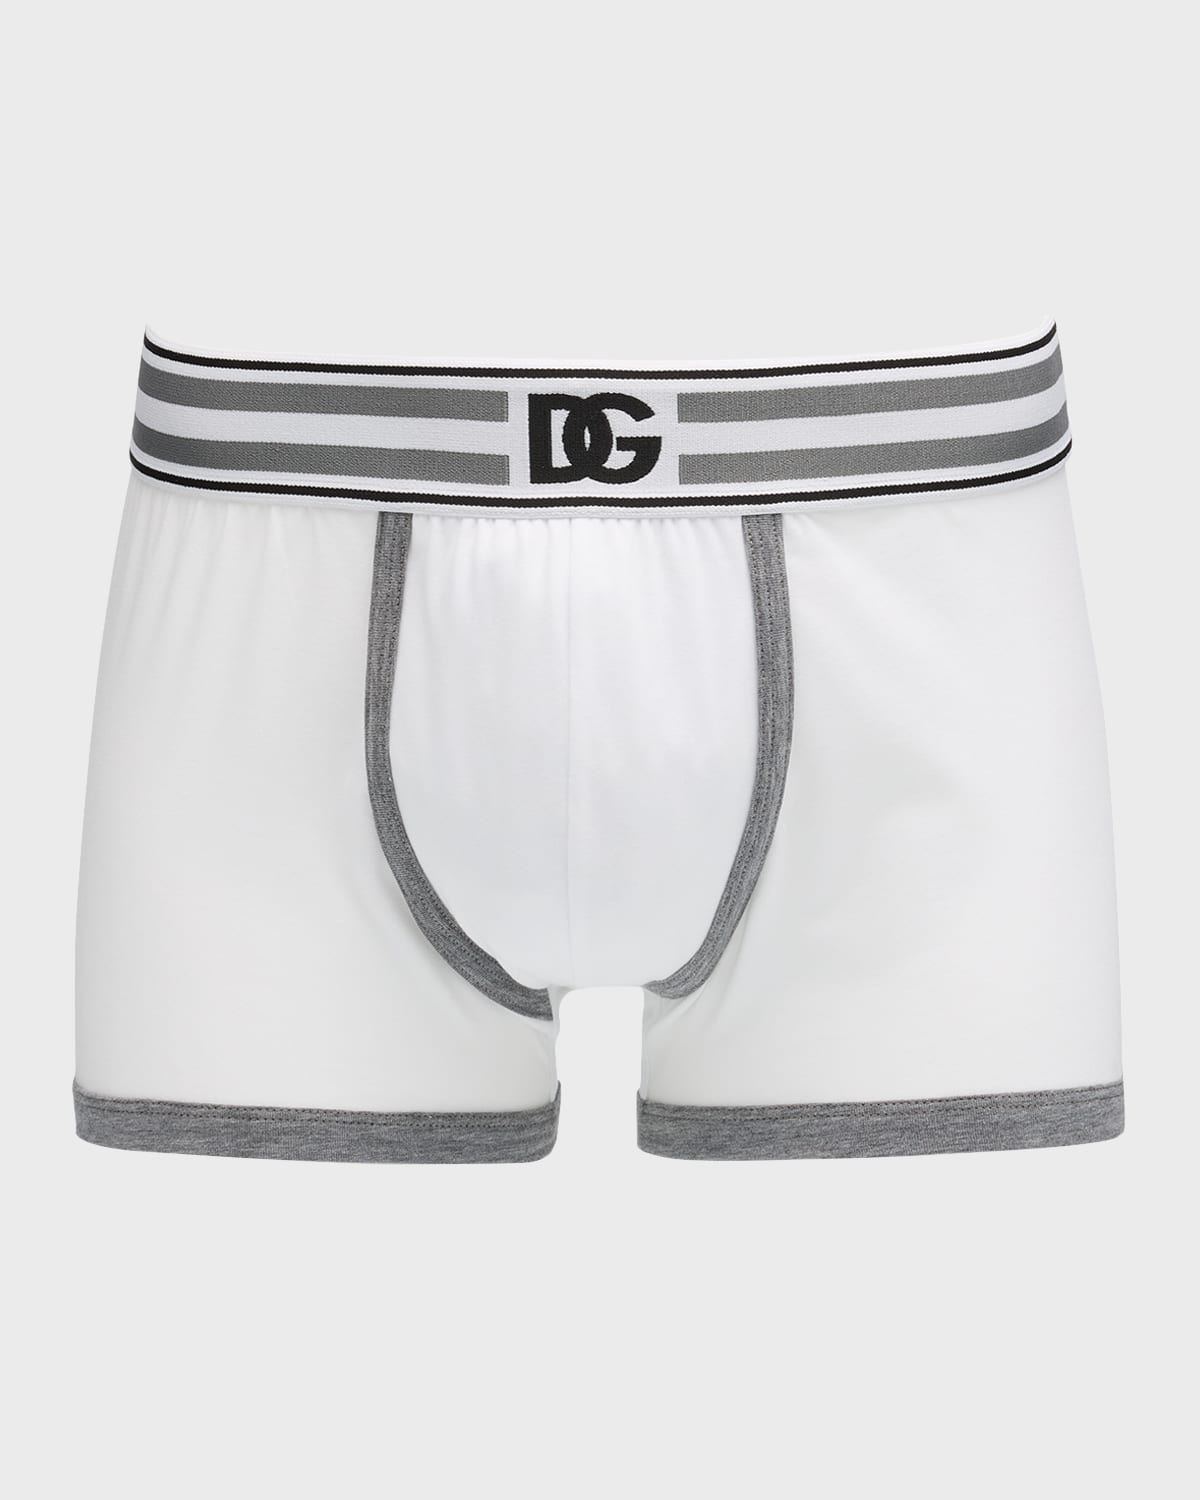 DOLCE & GABBANA MEN'S BOXER BRIEFS WITH CONTRAST PIPING